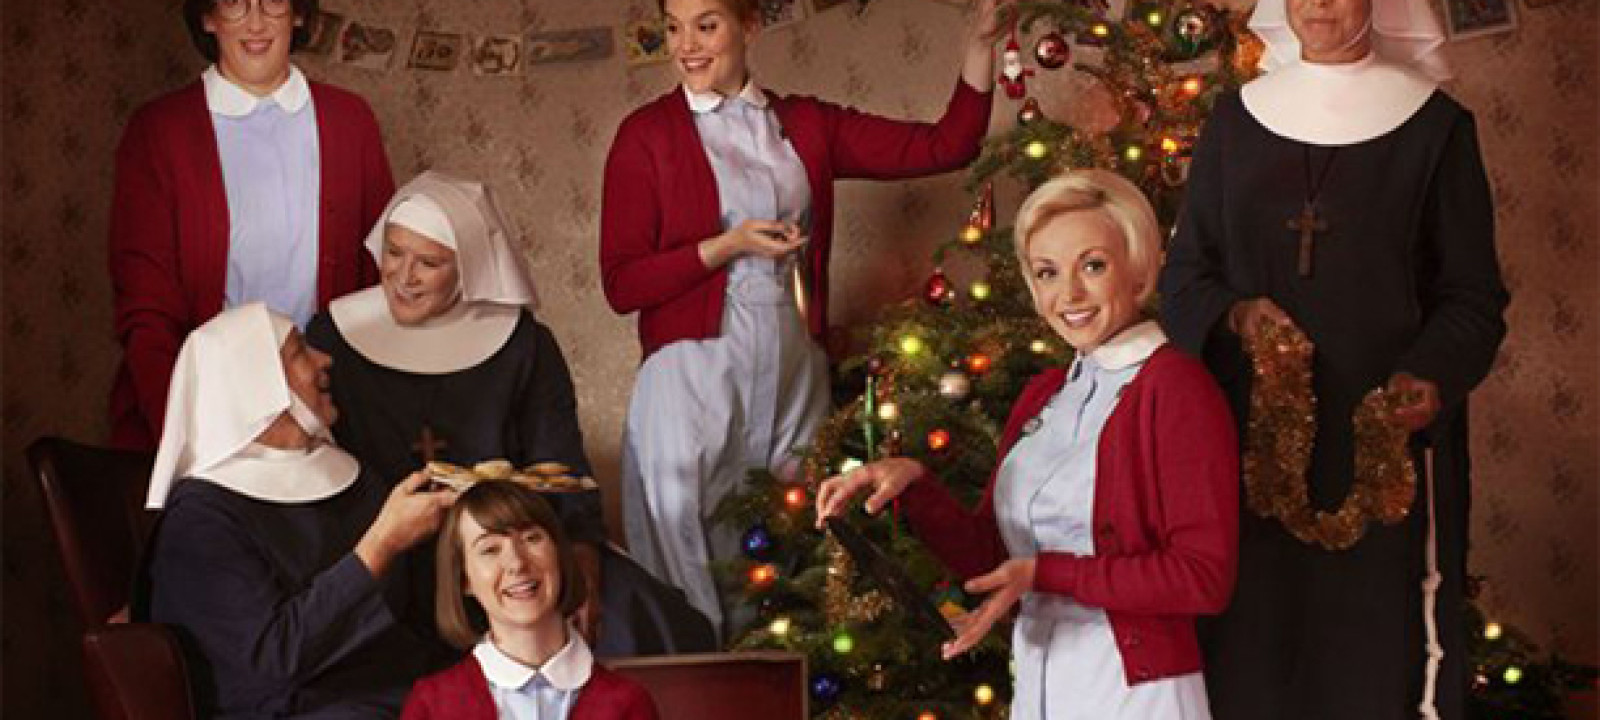 First Look ‘Call the Midwife’ Christmas Special Photos, Airing on PBS